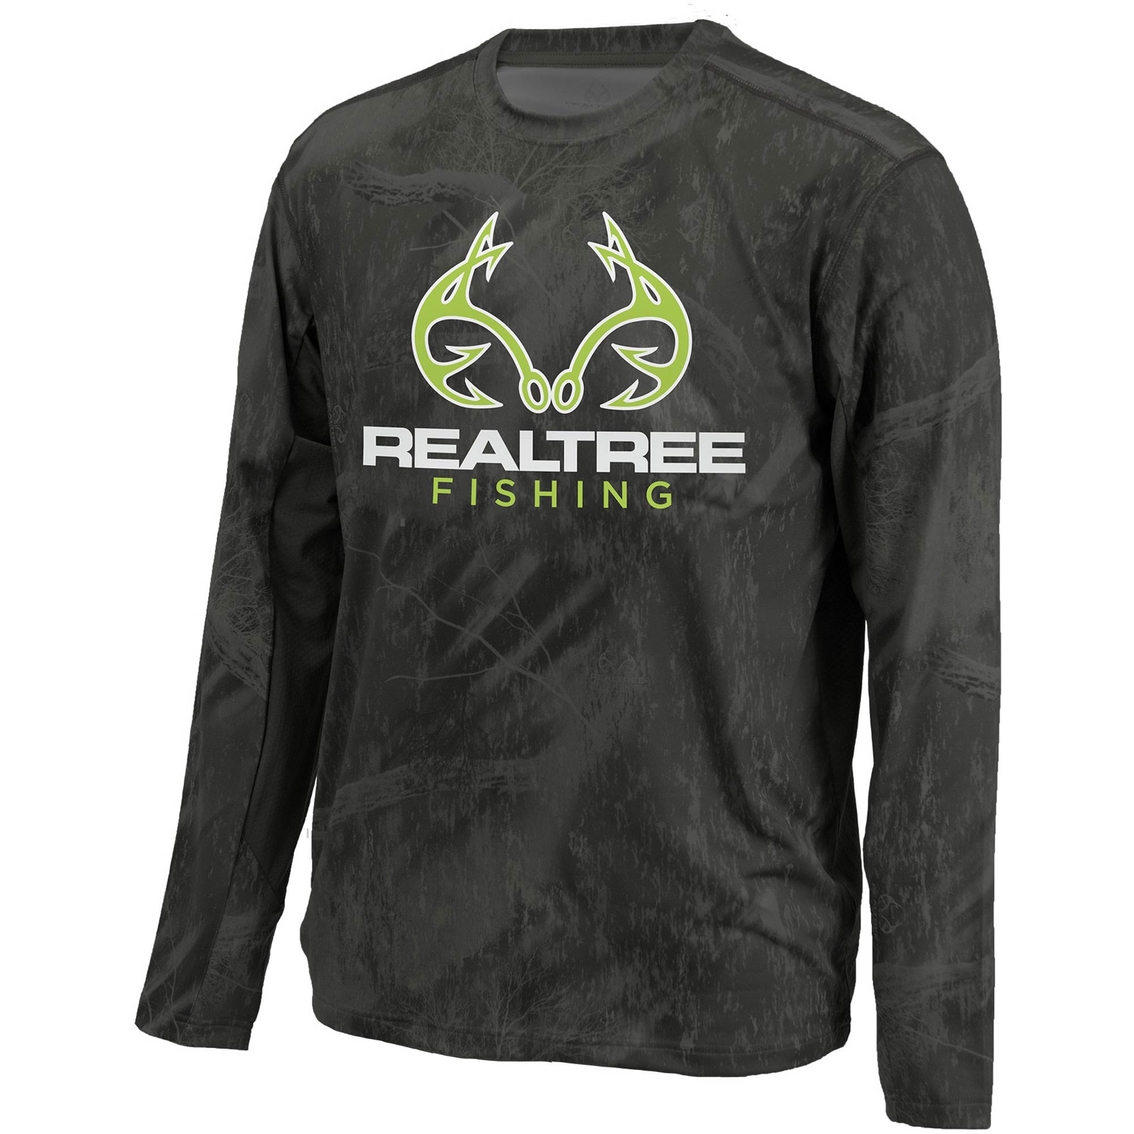 Realtree Fishing Cast Performance Tee, Shirts, Clothing & Accessories